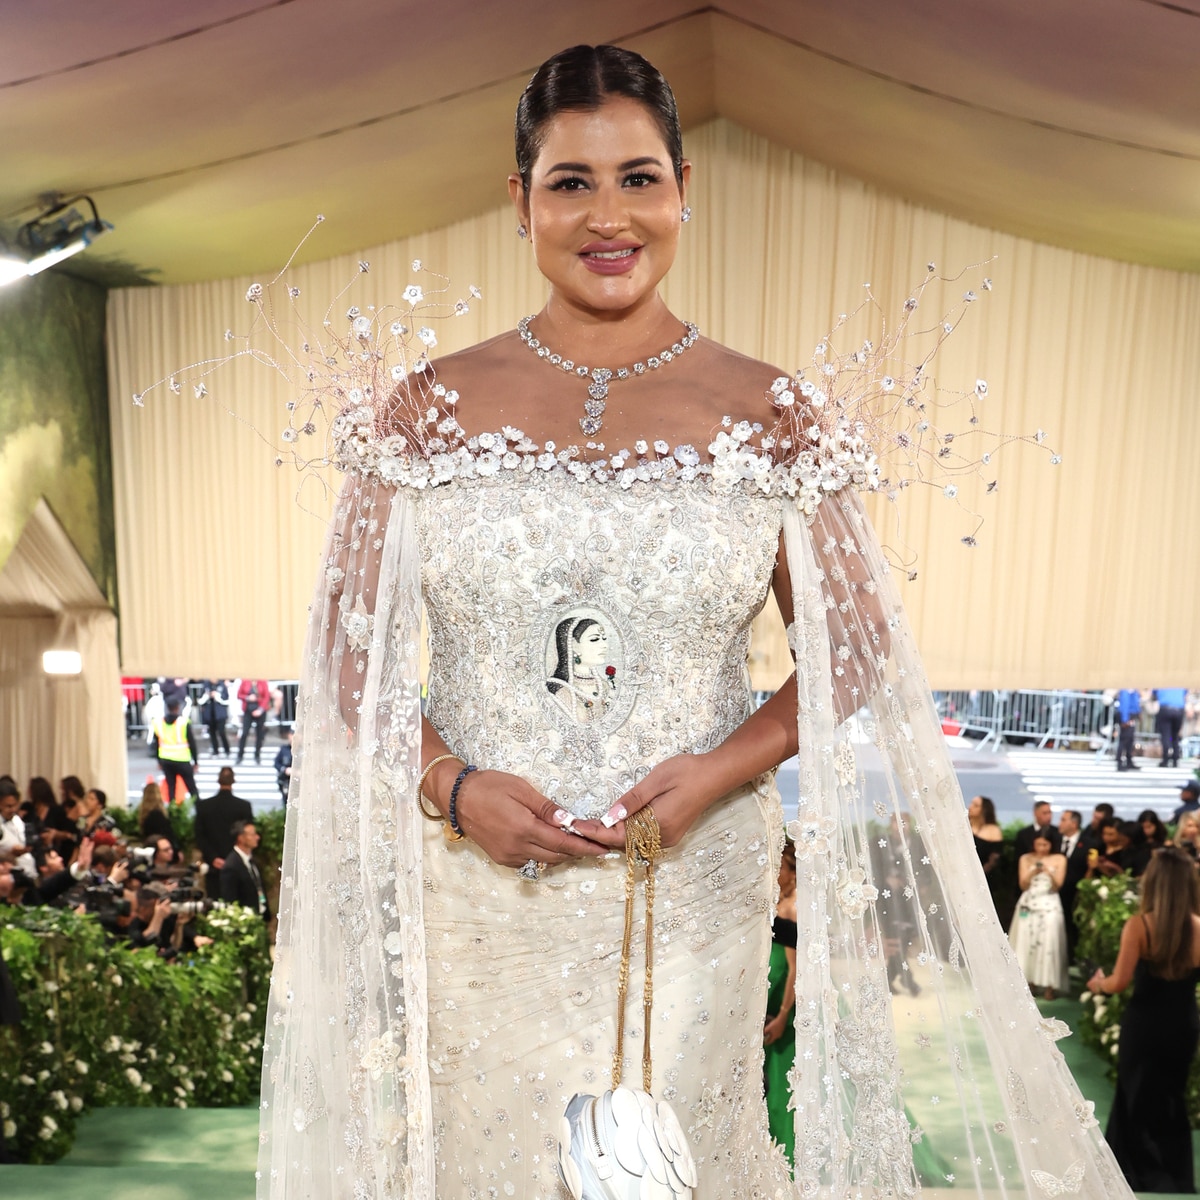 Billionaire Sudha Reddy Stuns at Met Gala With $10 Million Necklace